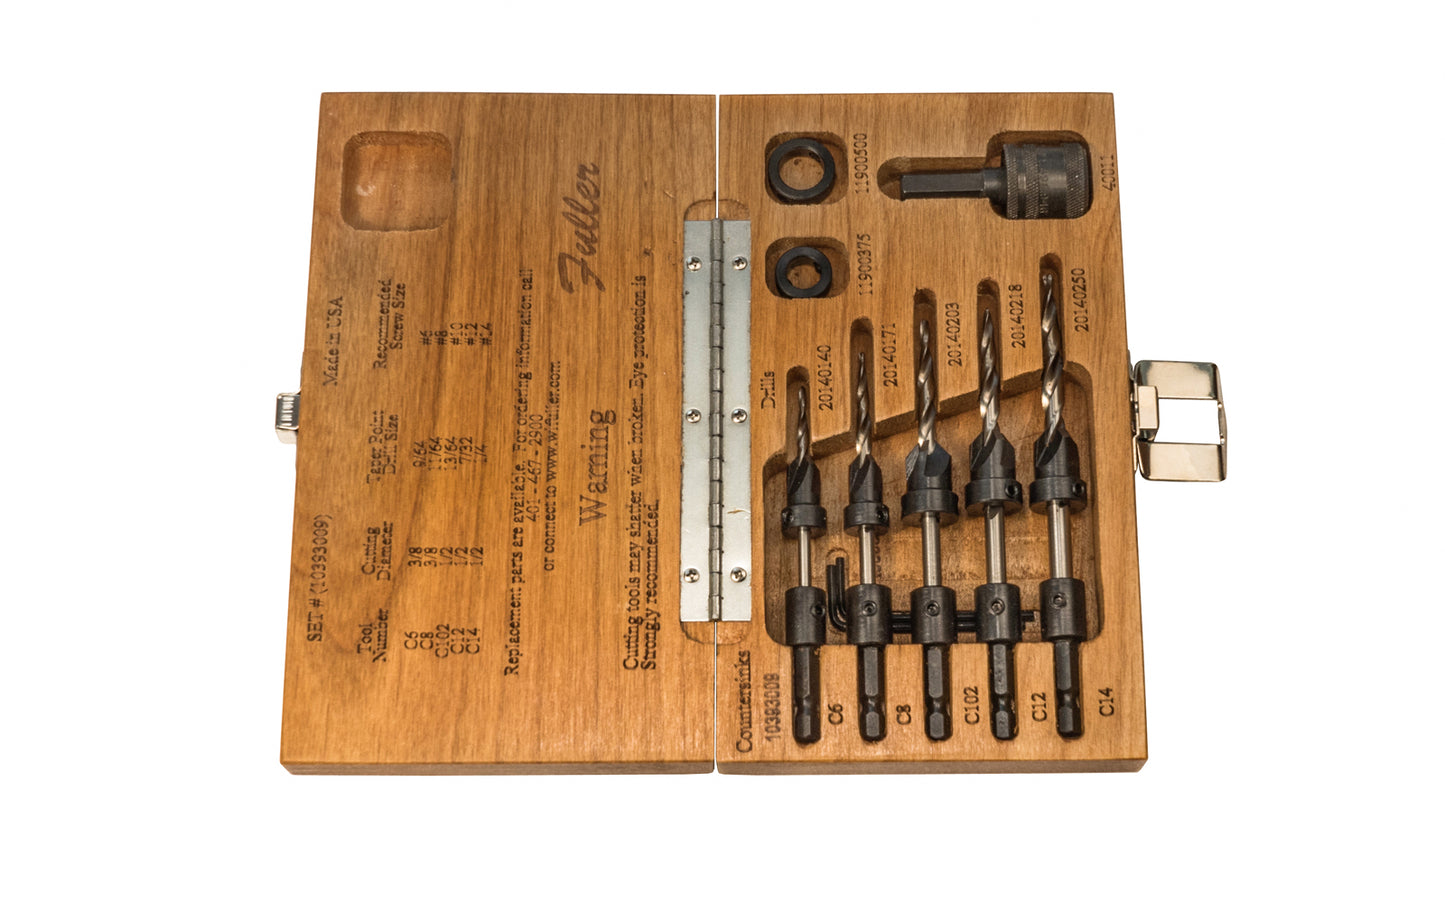 W.L. Fuller No. 9 Set - Model 10393009 - Combination countersink & quick change taper drill bit set with a quick change adapter & stop collars. Set is designed for #6, #8, #10, #12, & #14 wood screws. Made of carbon steel & heat-treated. Four flute countersinks for clean & accurate boring. Hex Drill Bits. Made in USA